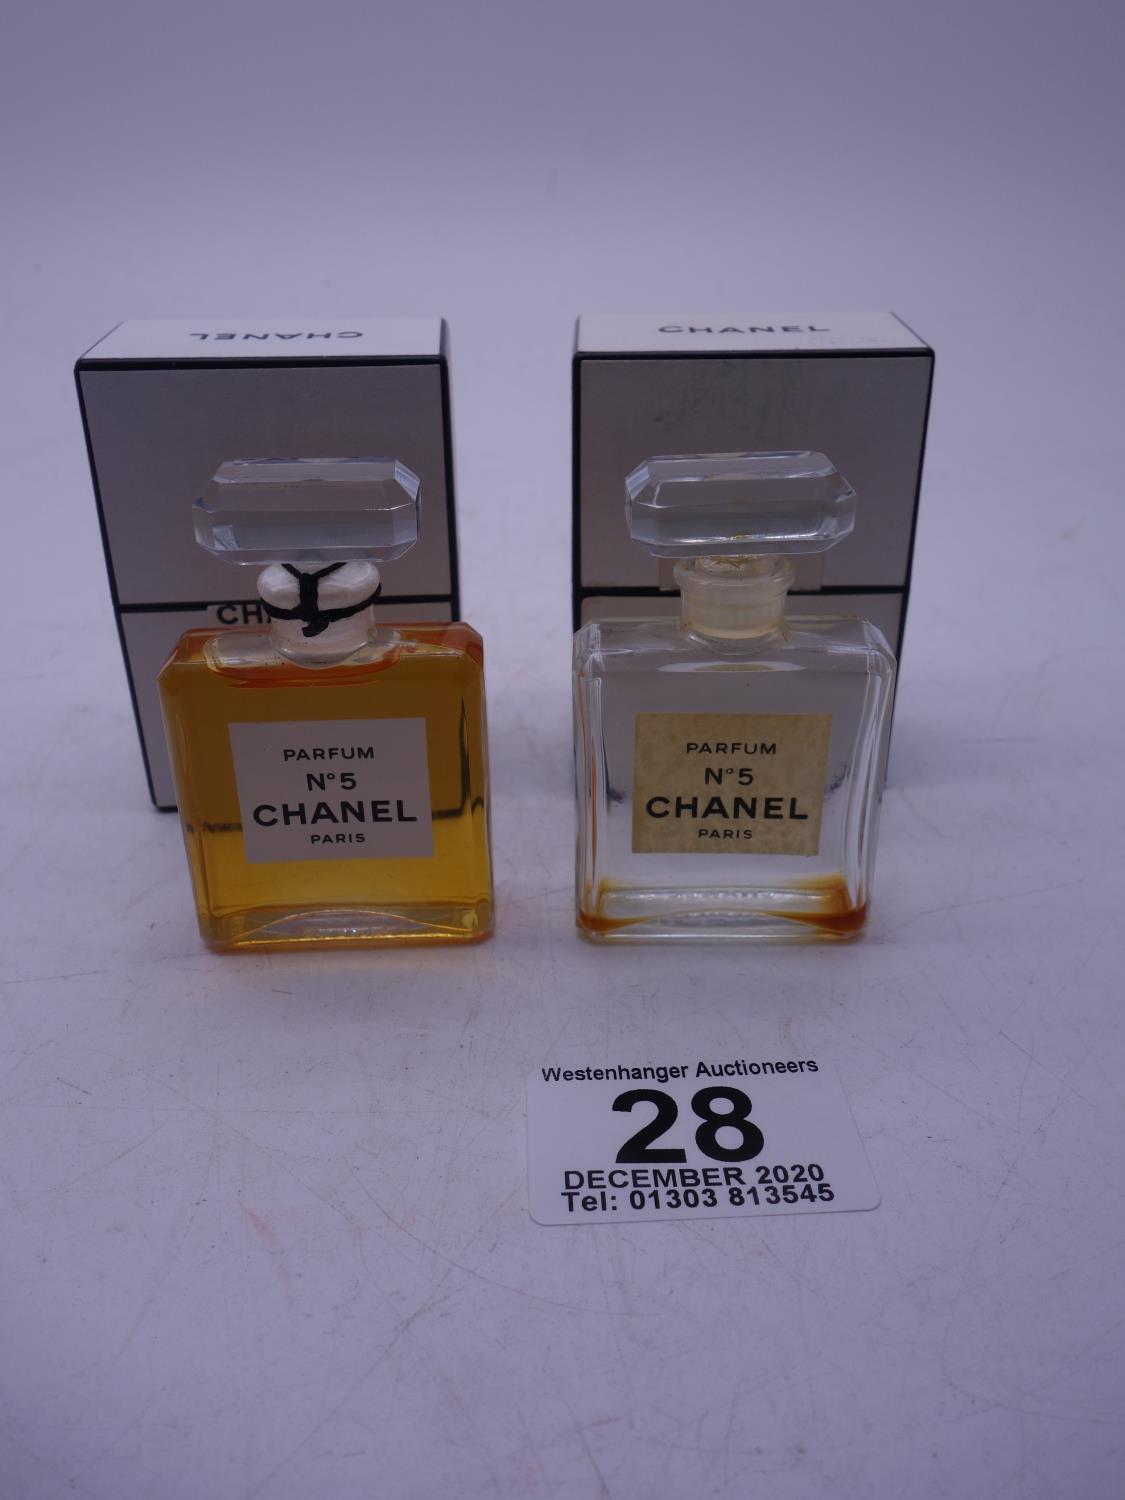 Chanel No.5 vintage un-opened perfume bottle and one other similar size opened bottle,